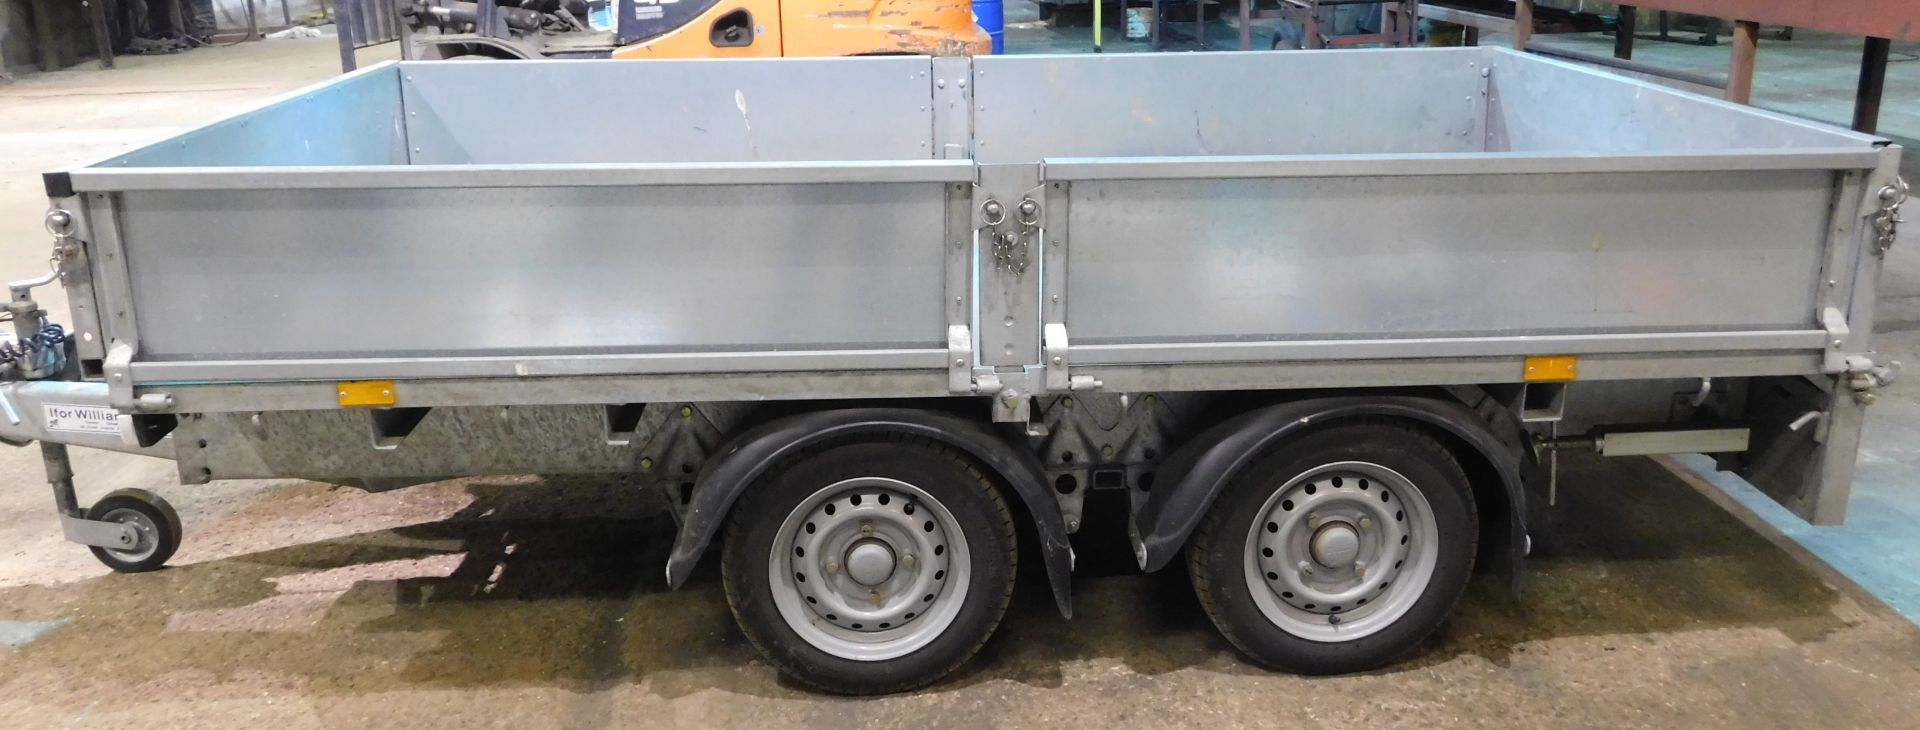 Ifor Williams Type 2Cb LT105G Twin Axle Trailer, Serial Number; 5159713, Manufactured Nov 2018, - Image 4 of 10